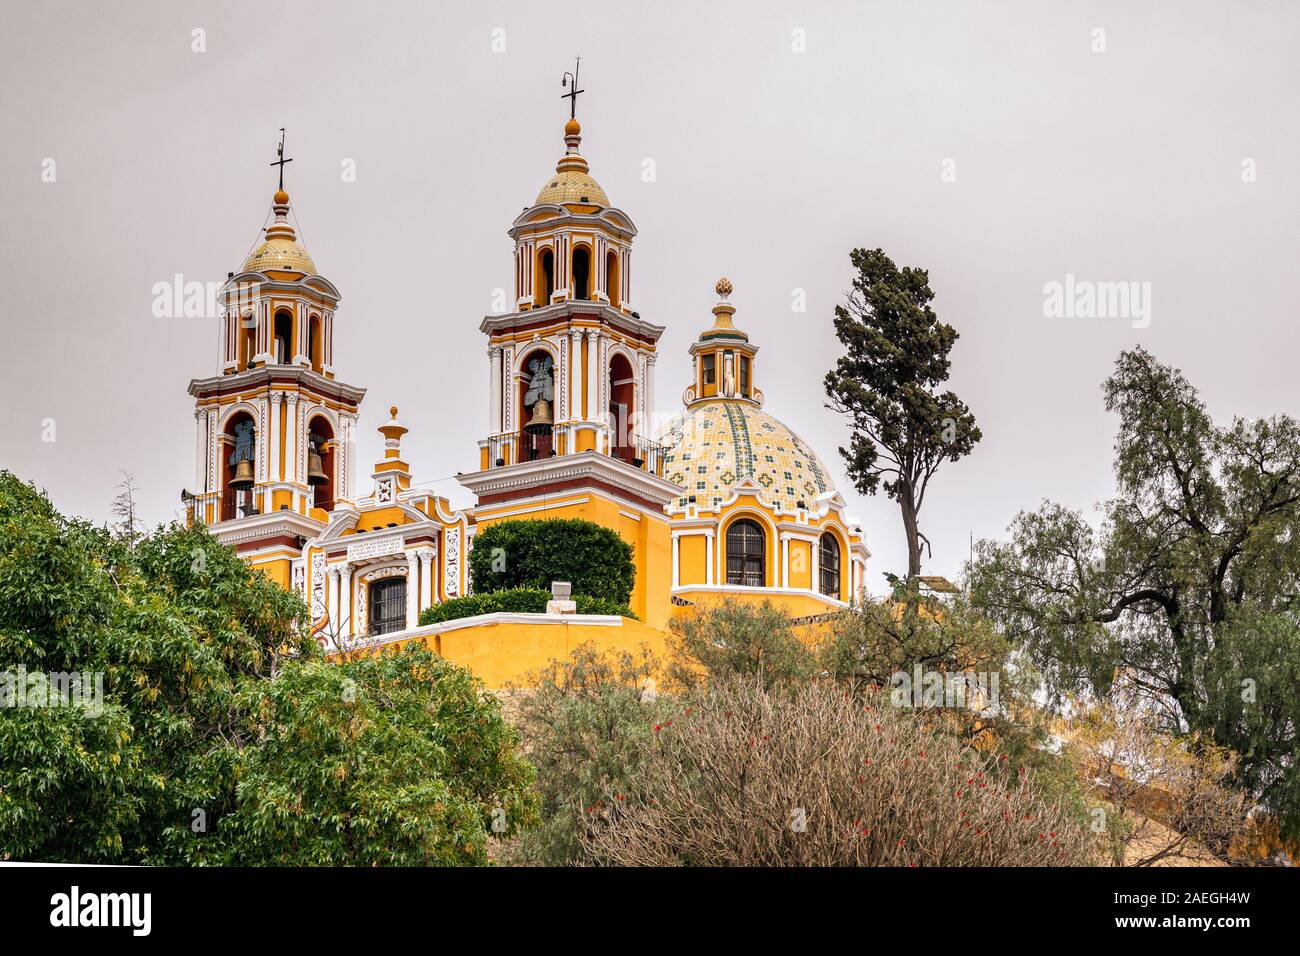 Famous landmark, yellow church - Our Lady of the Remedies sanctuary built on top of the Great Pyramid in Cholula, Puebla, Mexico. Stock Photo